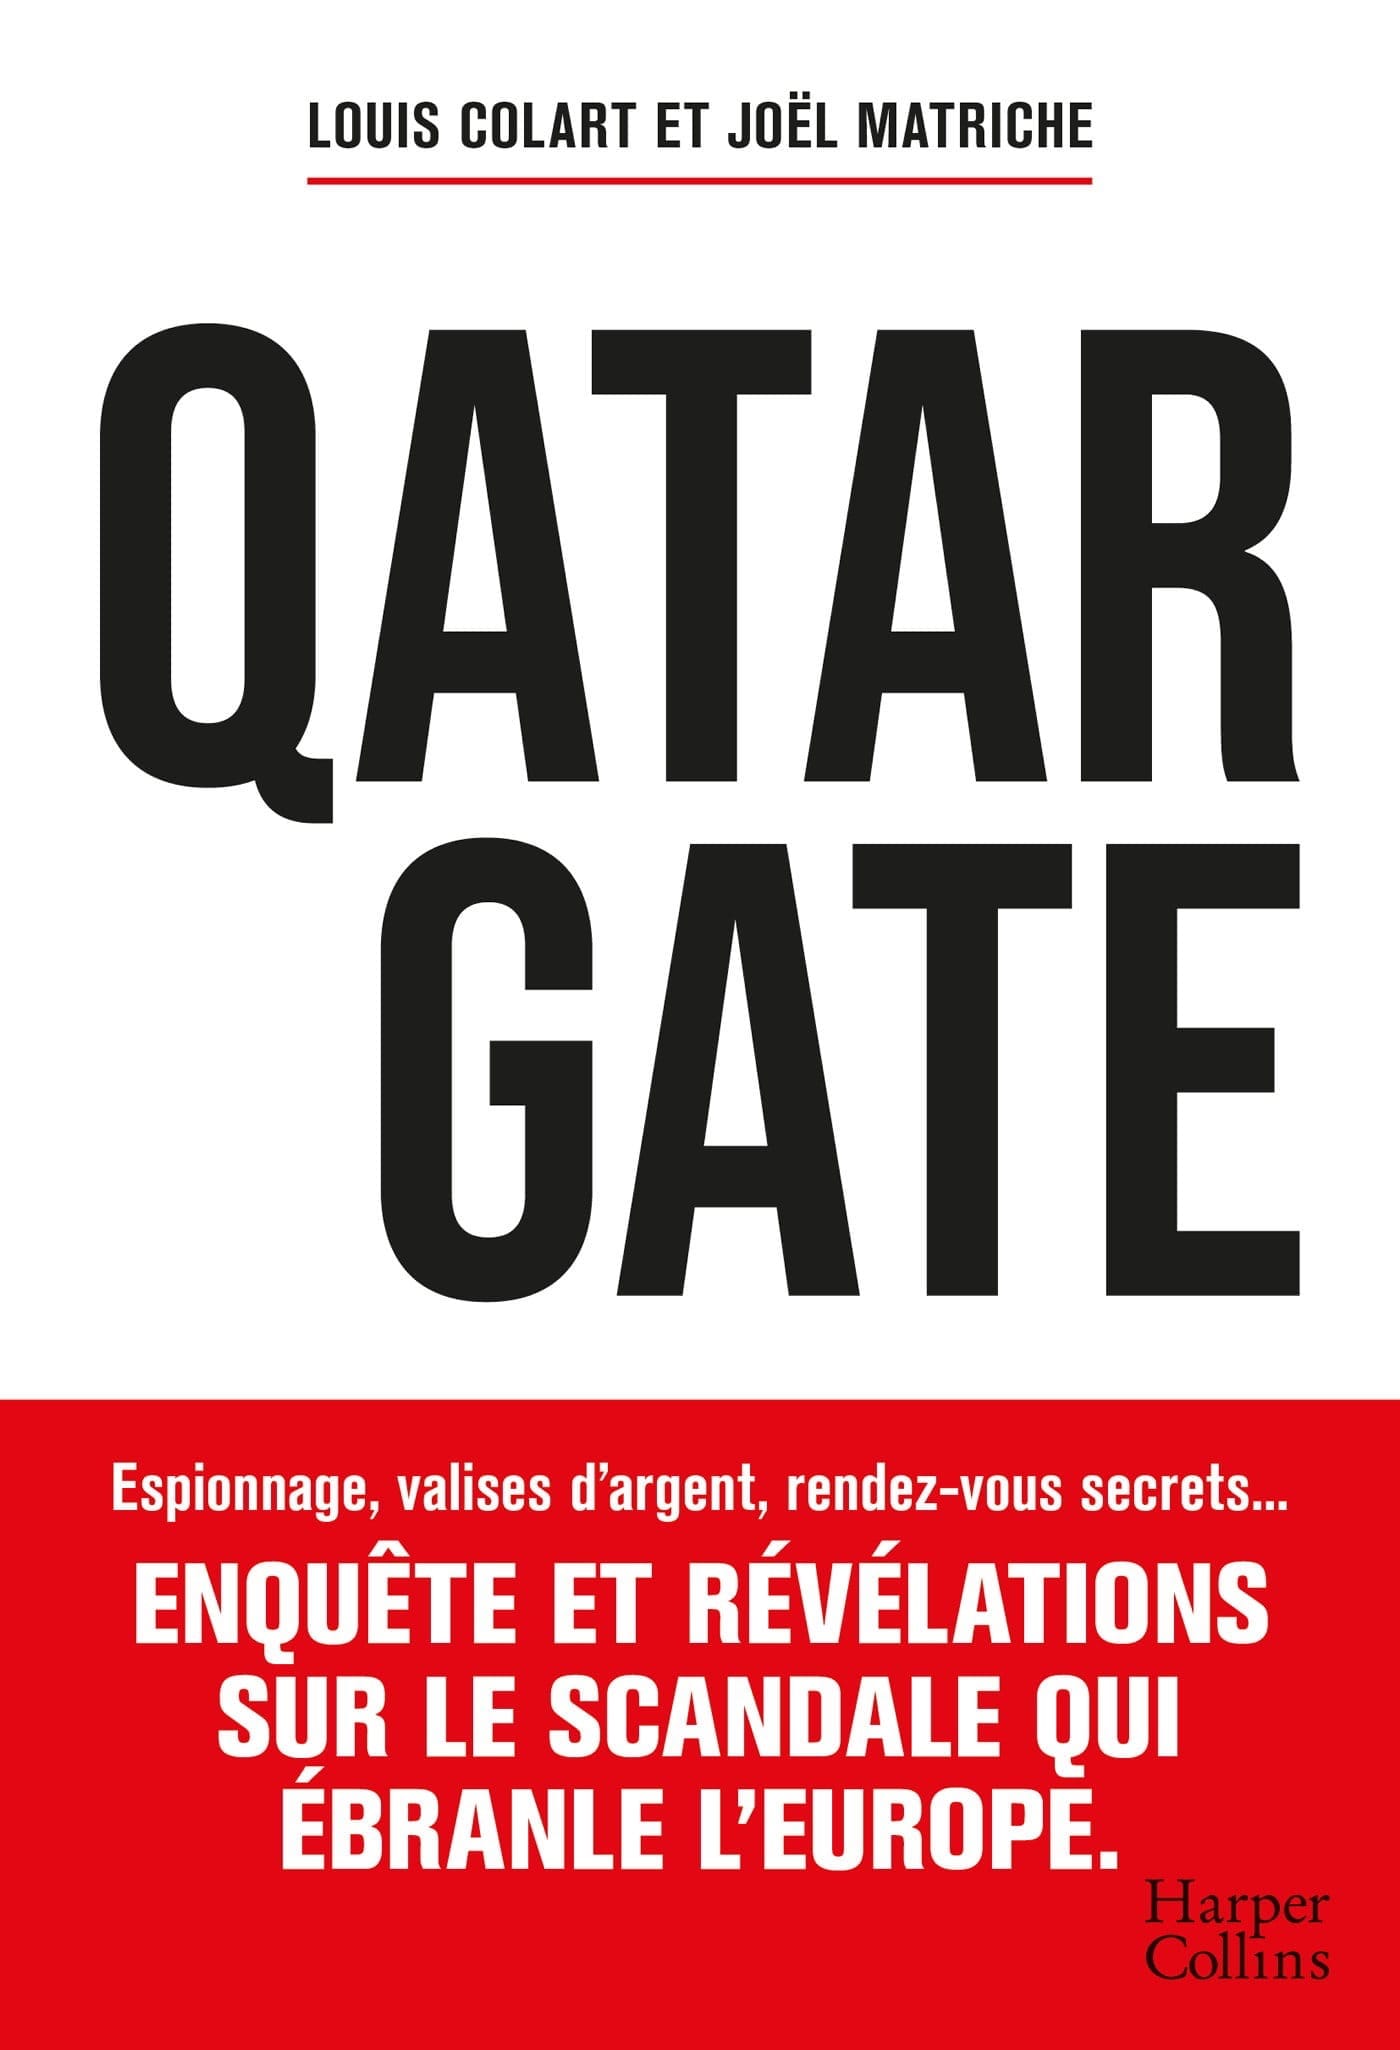 A New Book on Qatargate Reveals Central Role of Qatar’s Minister of Labour and His Algerian Consigliere in Alleged Corruption Scandal